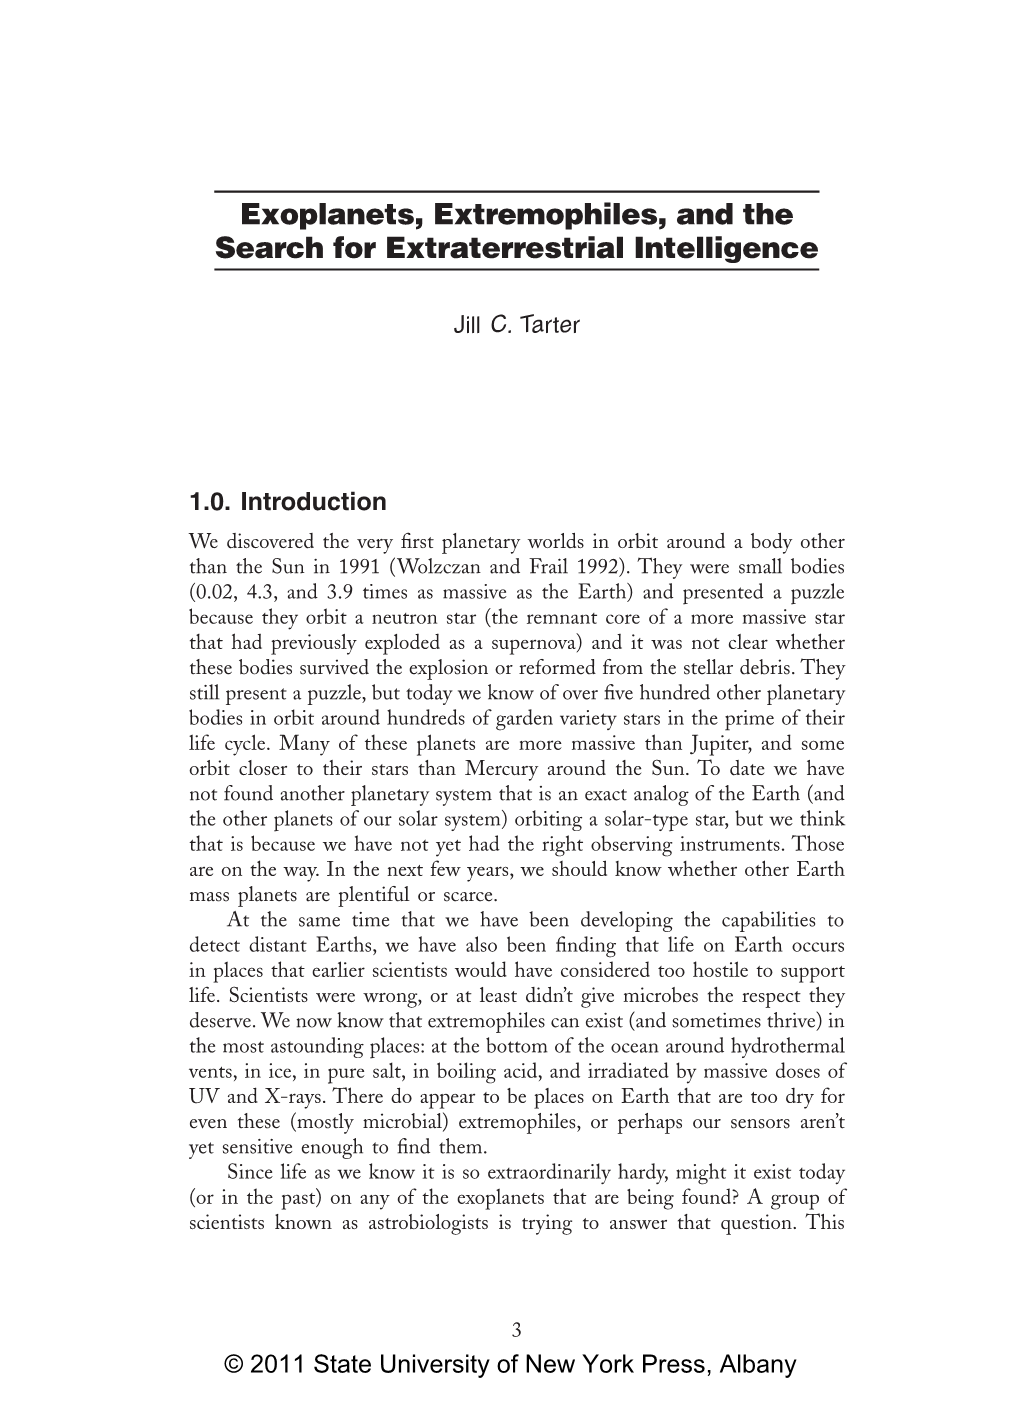 Communication with Extraterrestrial Intelligence (CETI), Ed